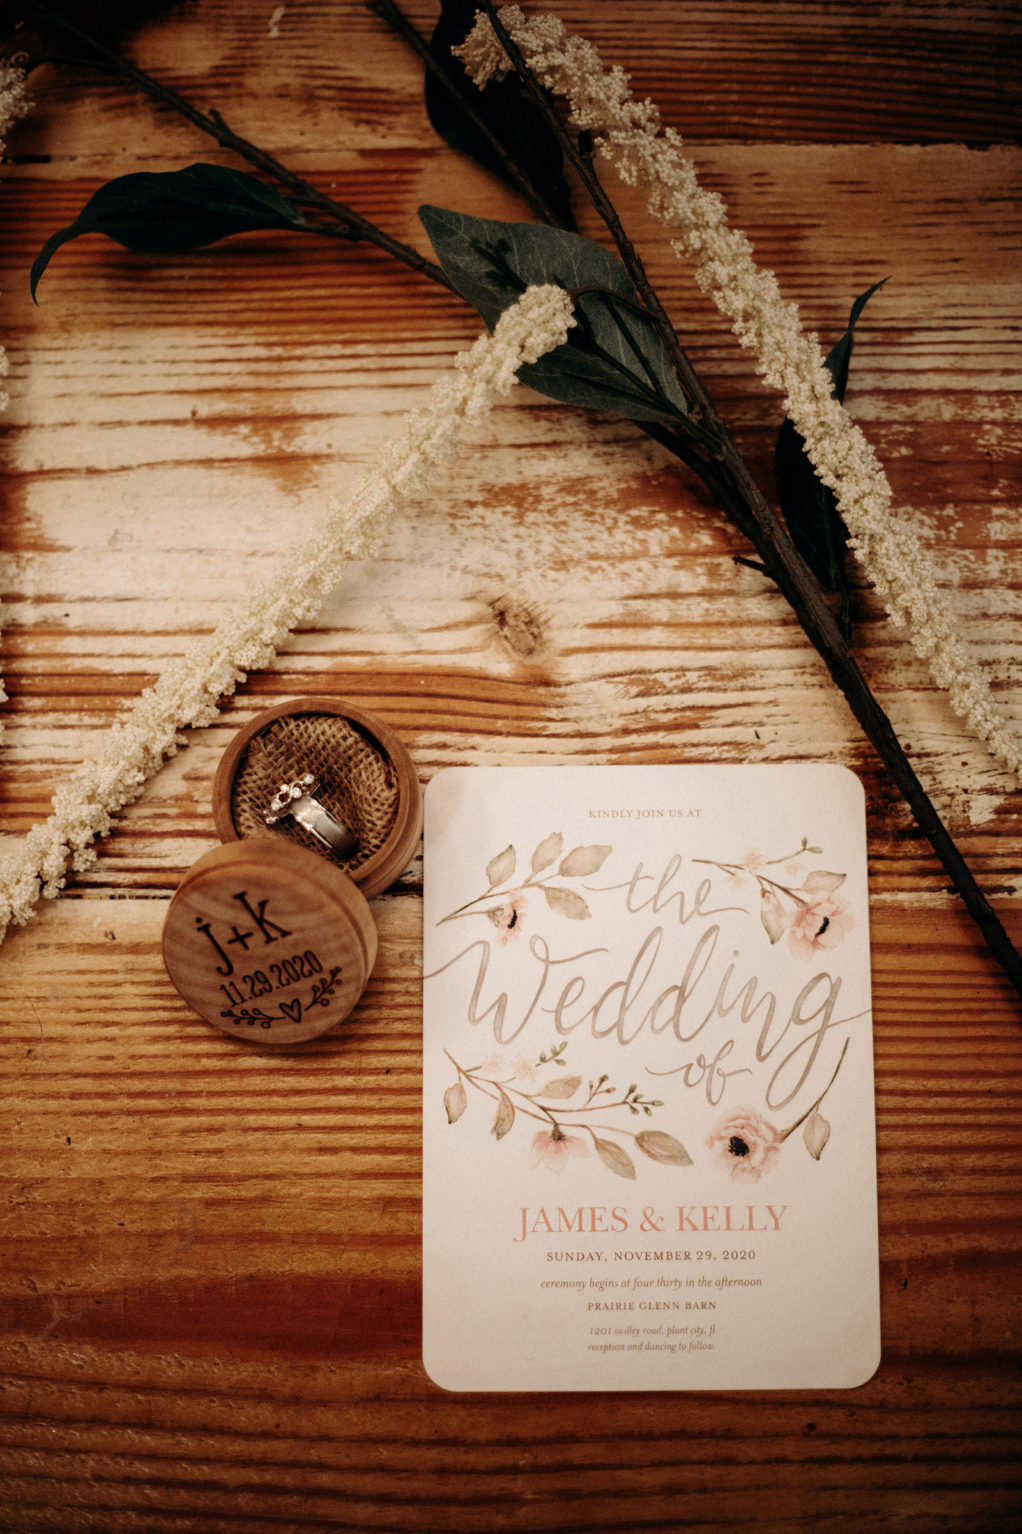 Rustic Wedding Invitation and Custom Engraved Wooden Ring Box with Bride and Groom Rings